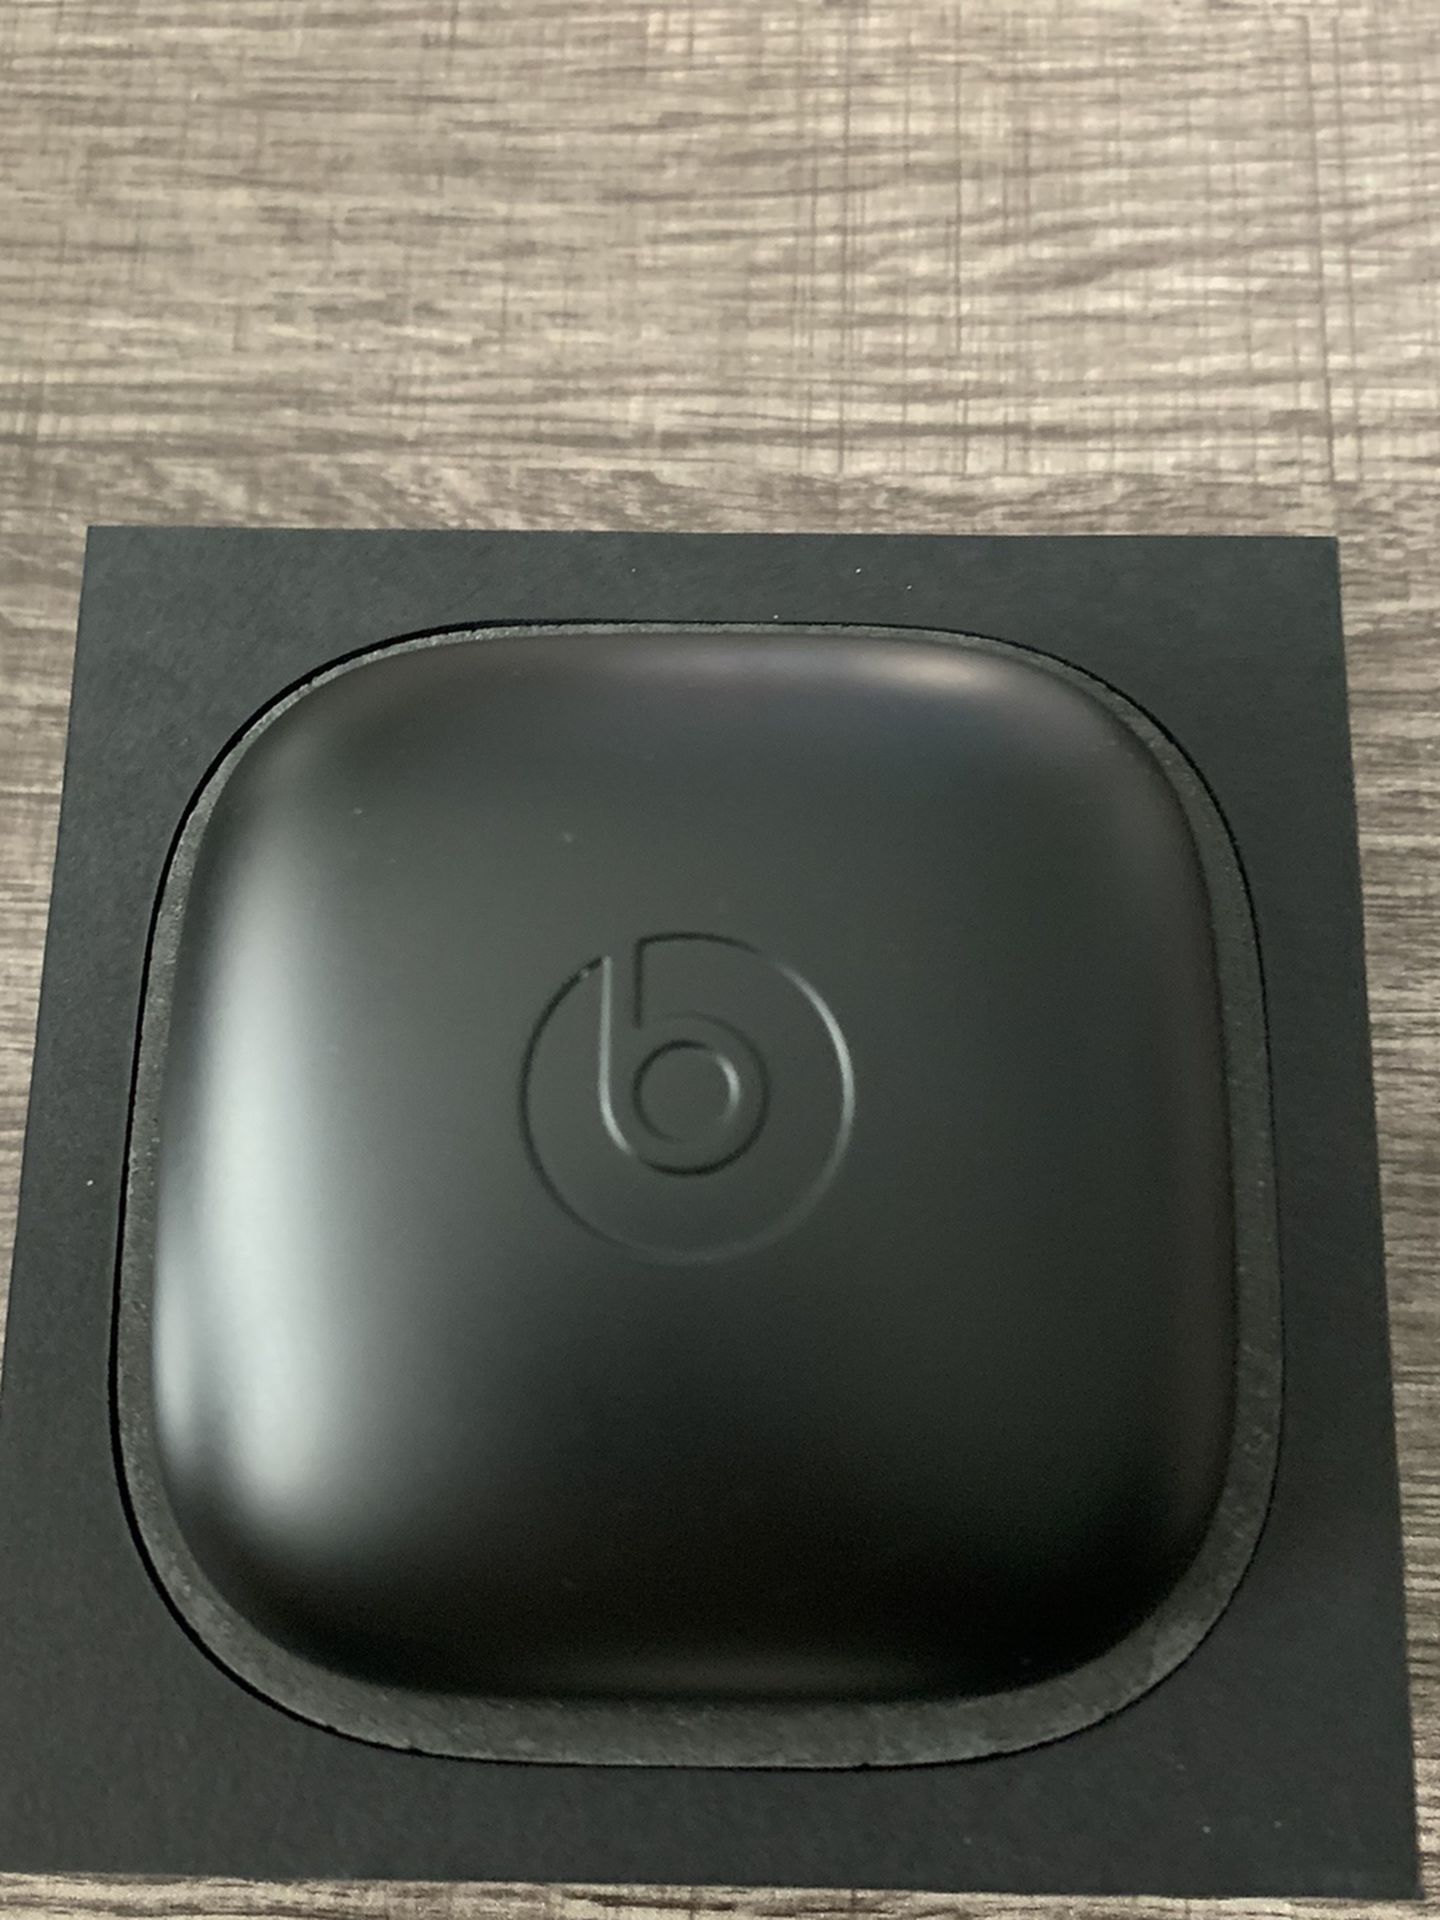 POWERBEATS PRO. OPENED BOX. BRAND NEW. NEVER USED. PERFECT CONDITION